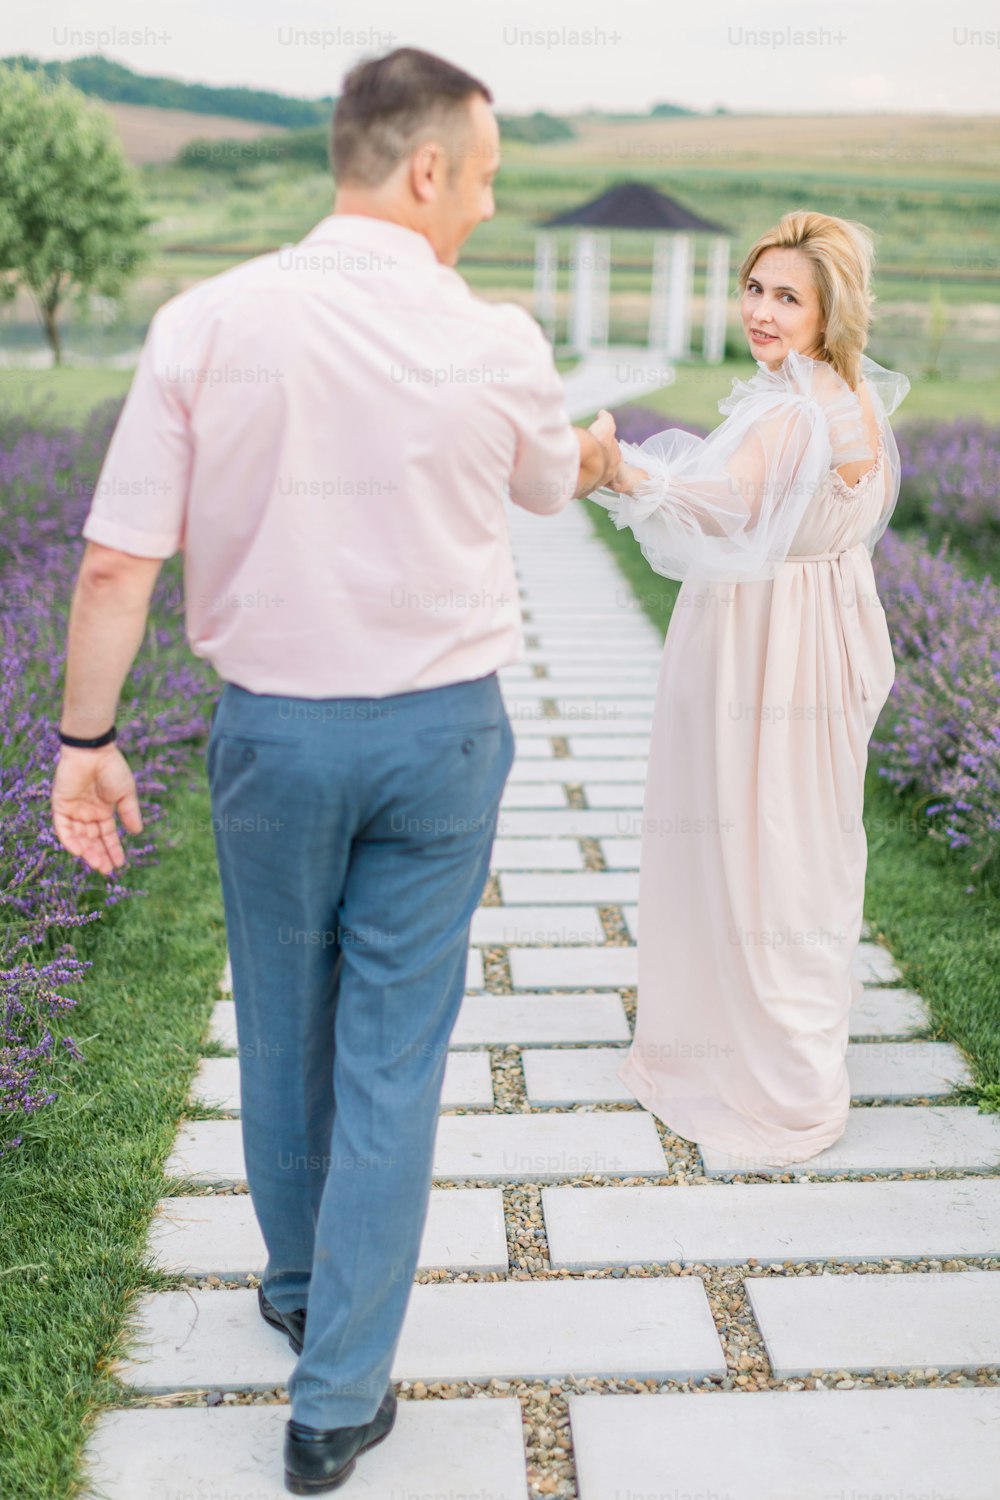 Give me your hand, follow me. Love through the years together. Pretty charming blond mature lady in elegant dress, holding hand and walking with her handsome man outdoors in lavender field with gazebo